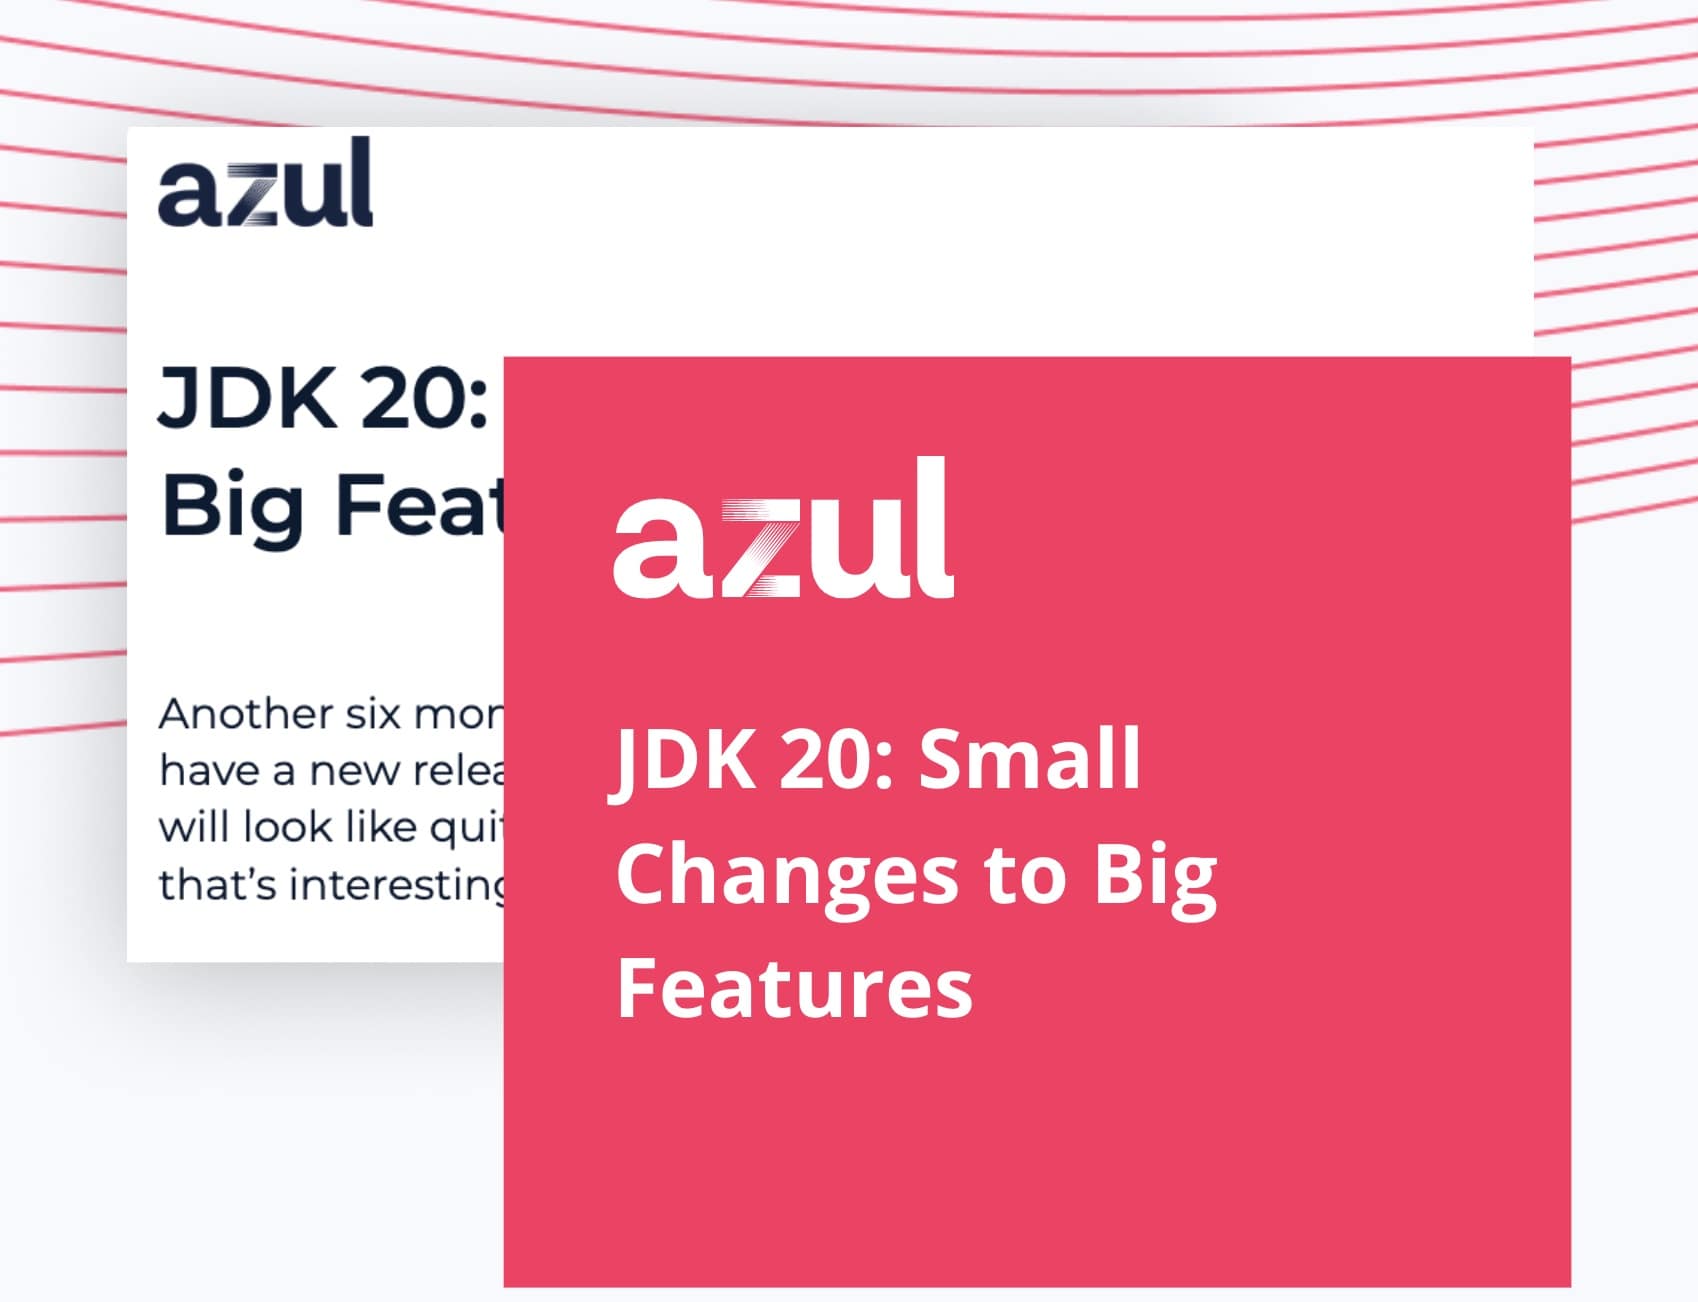 JDK 20 Small Changes to Big Features